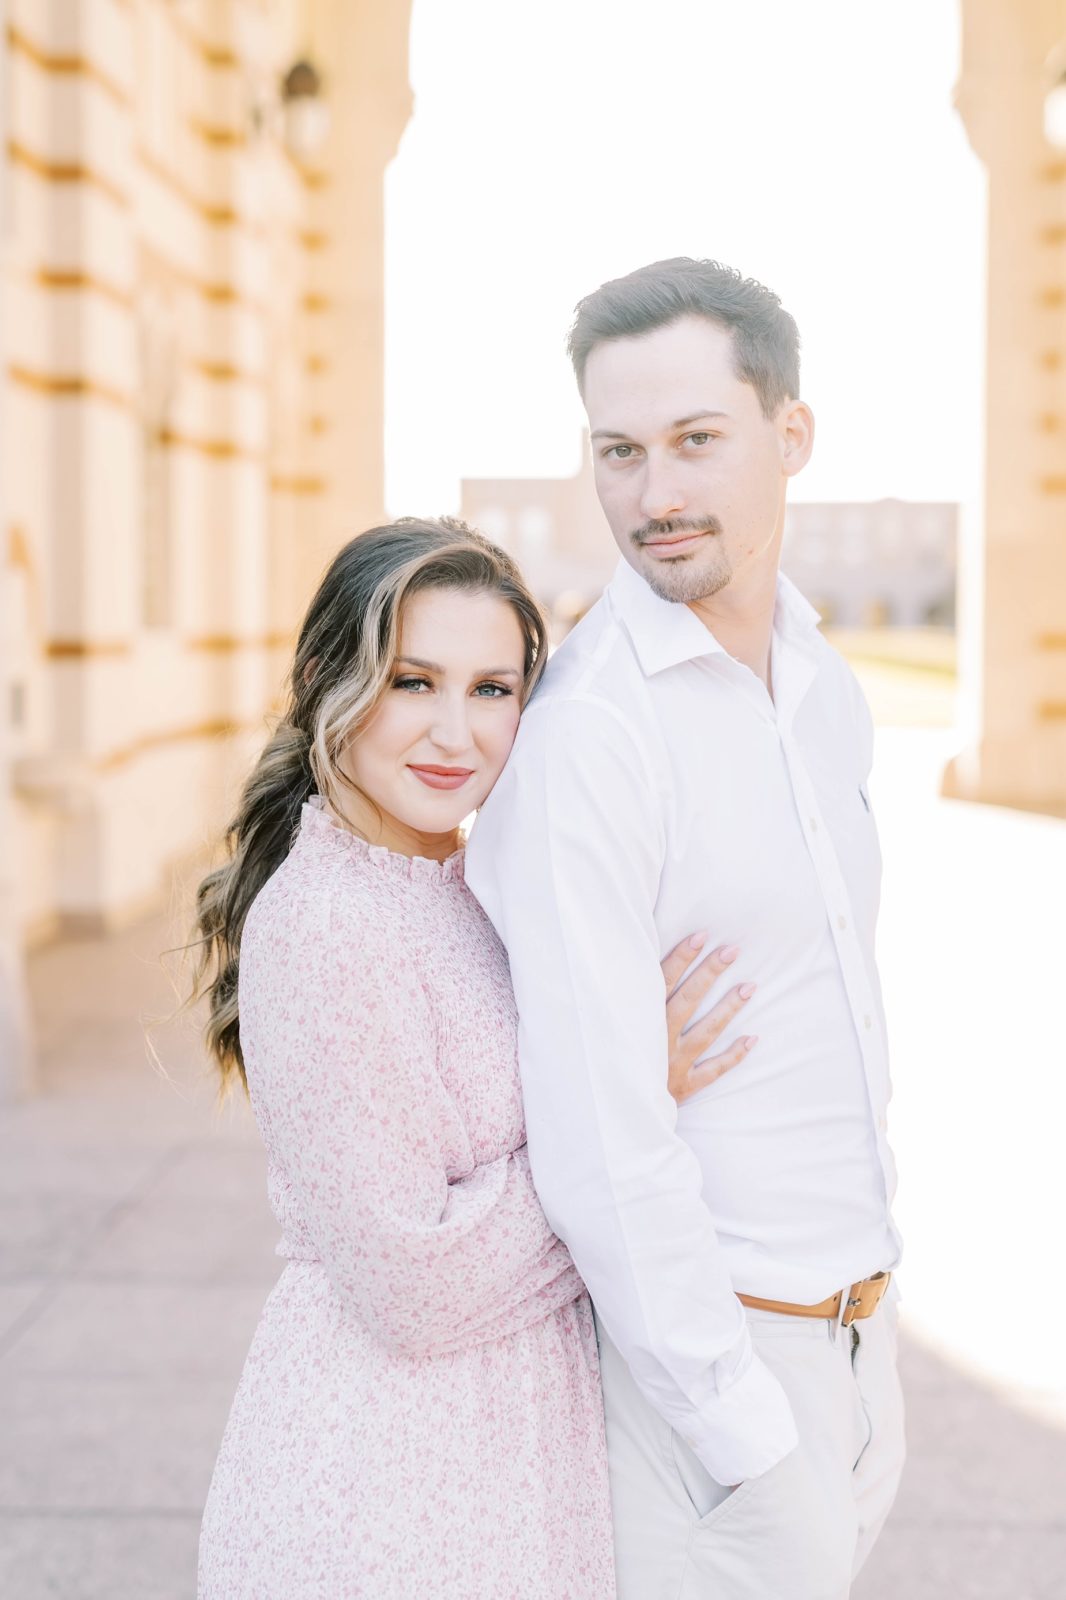 Christina Elliott Photography captures a bright airy engagement session at Rice University. Houston engagement photographers #christinaelliottphotography #Houstonengagements #riceuniversity #springengagements #sayIdo #Houstonengagementphotographers